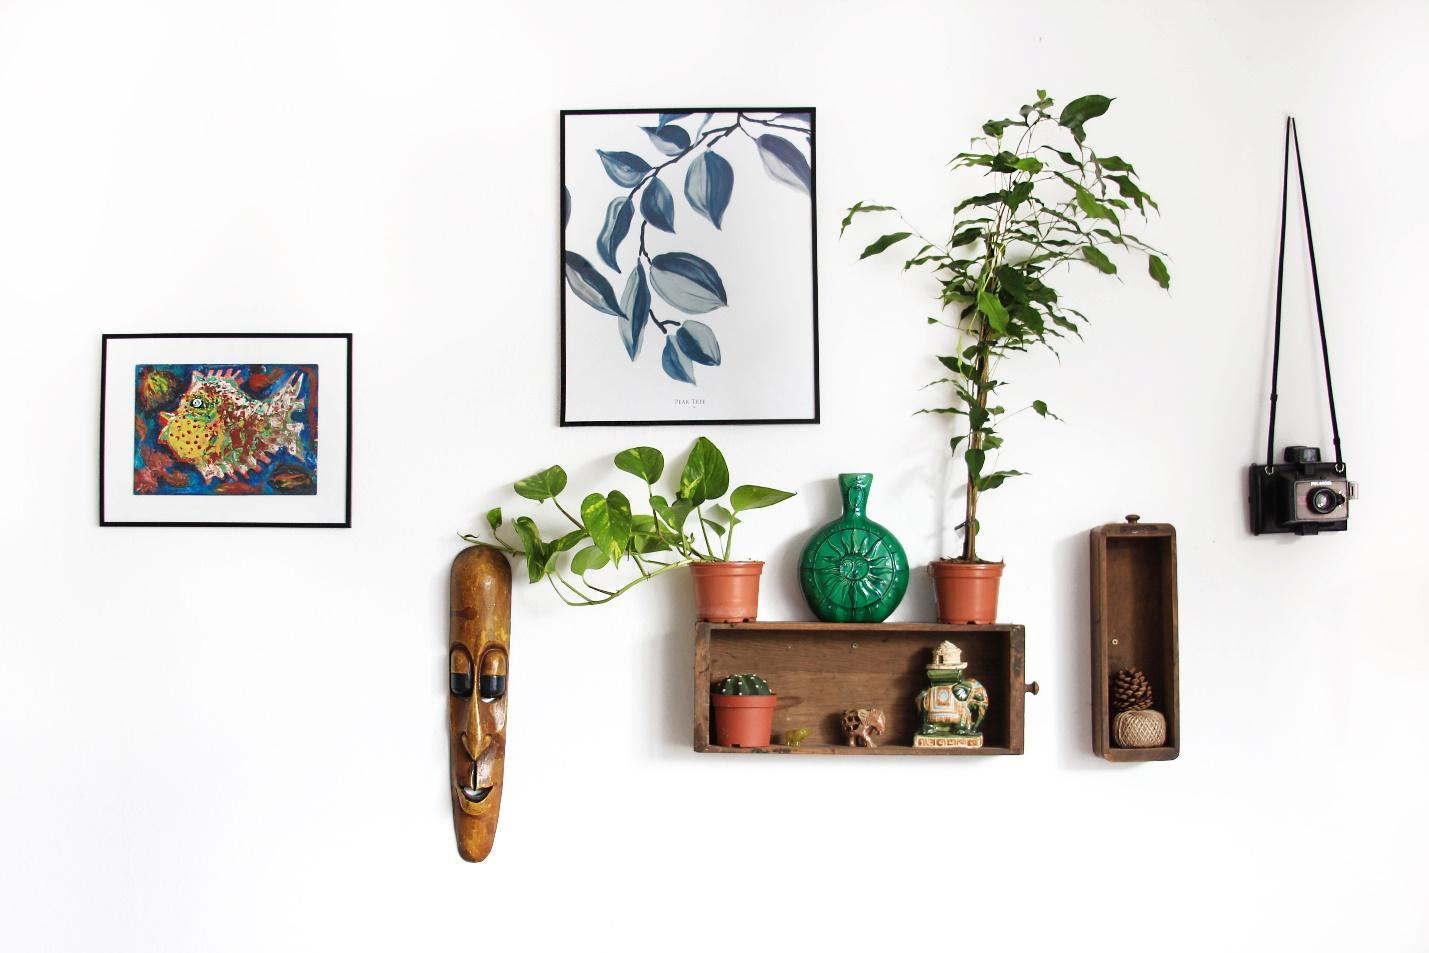 A wall decorated with details from wildlife and some plants on the shelf. Let’s learn more about how to use animal-inspired décor in your Florida home.